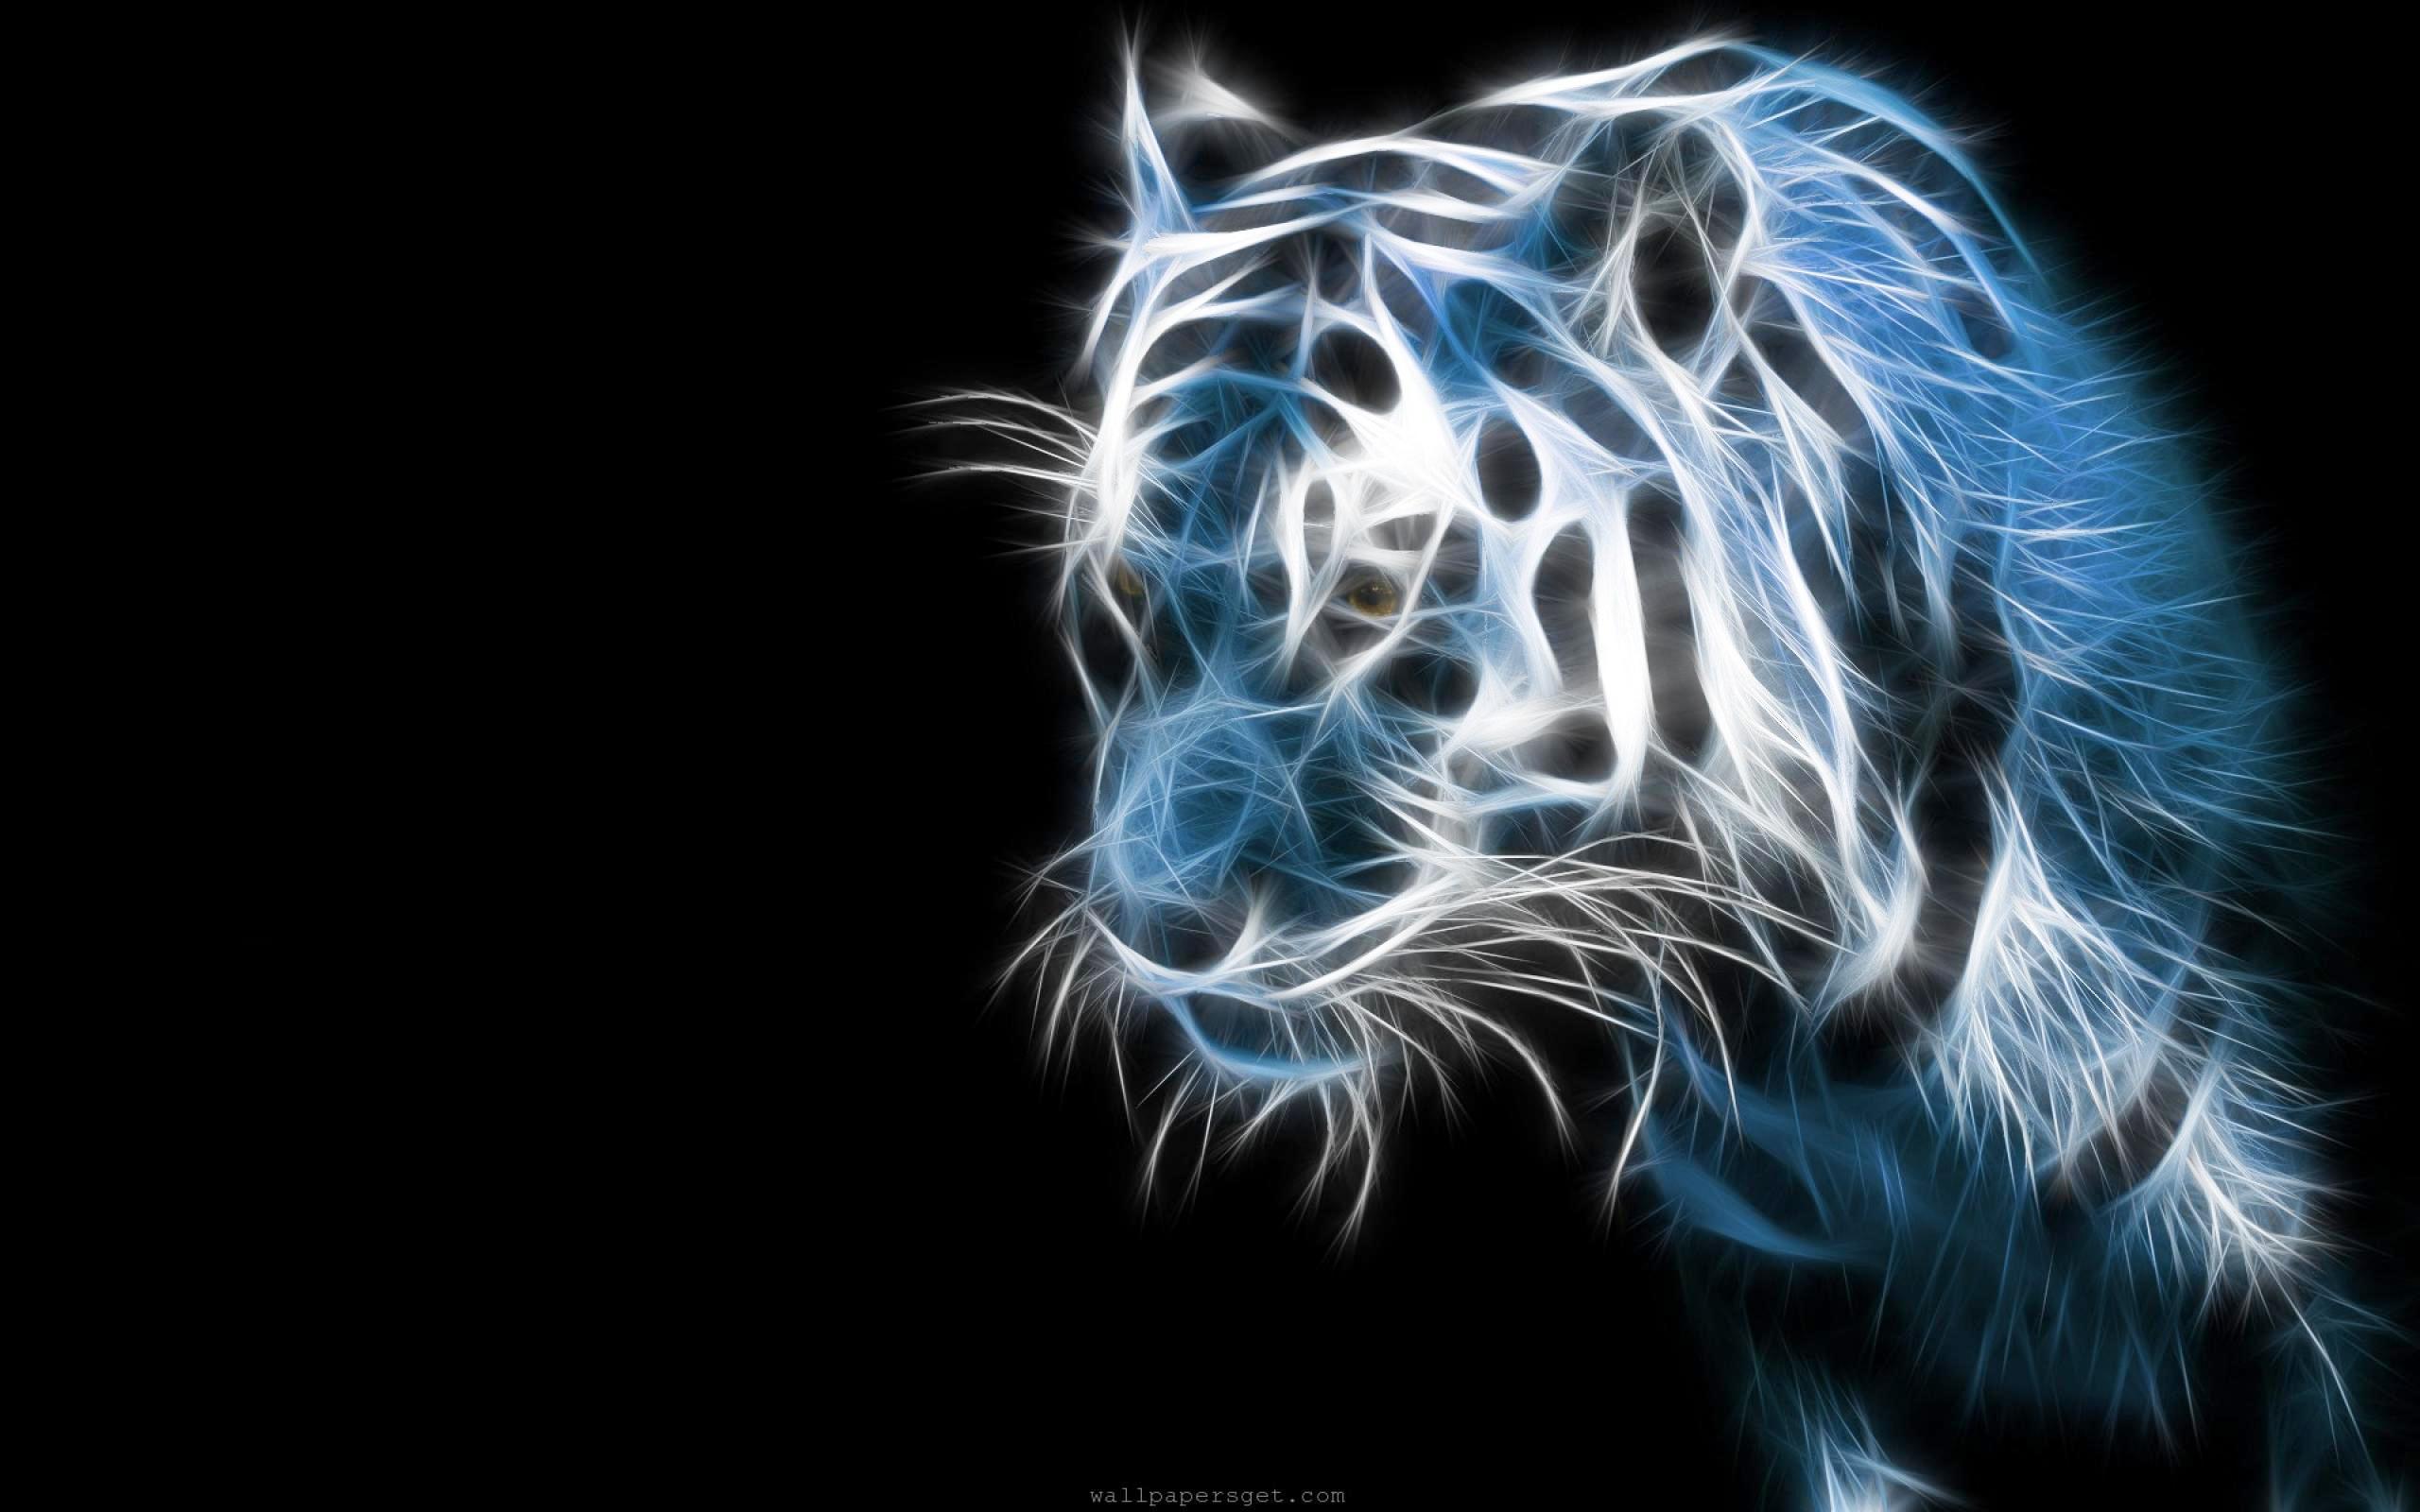 Top Picture: Cool Wallpaper Of Tigers, Amazing Tigers Image